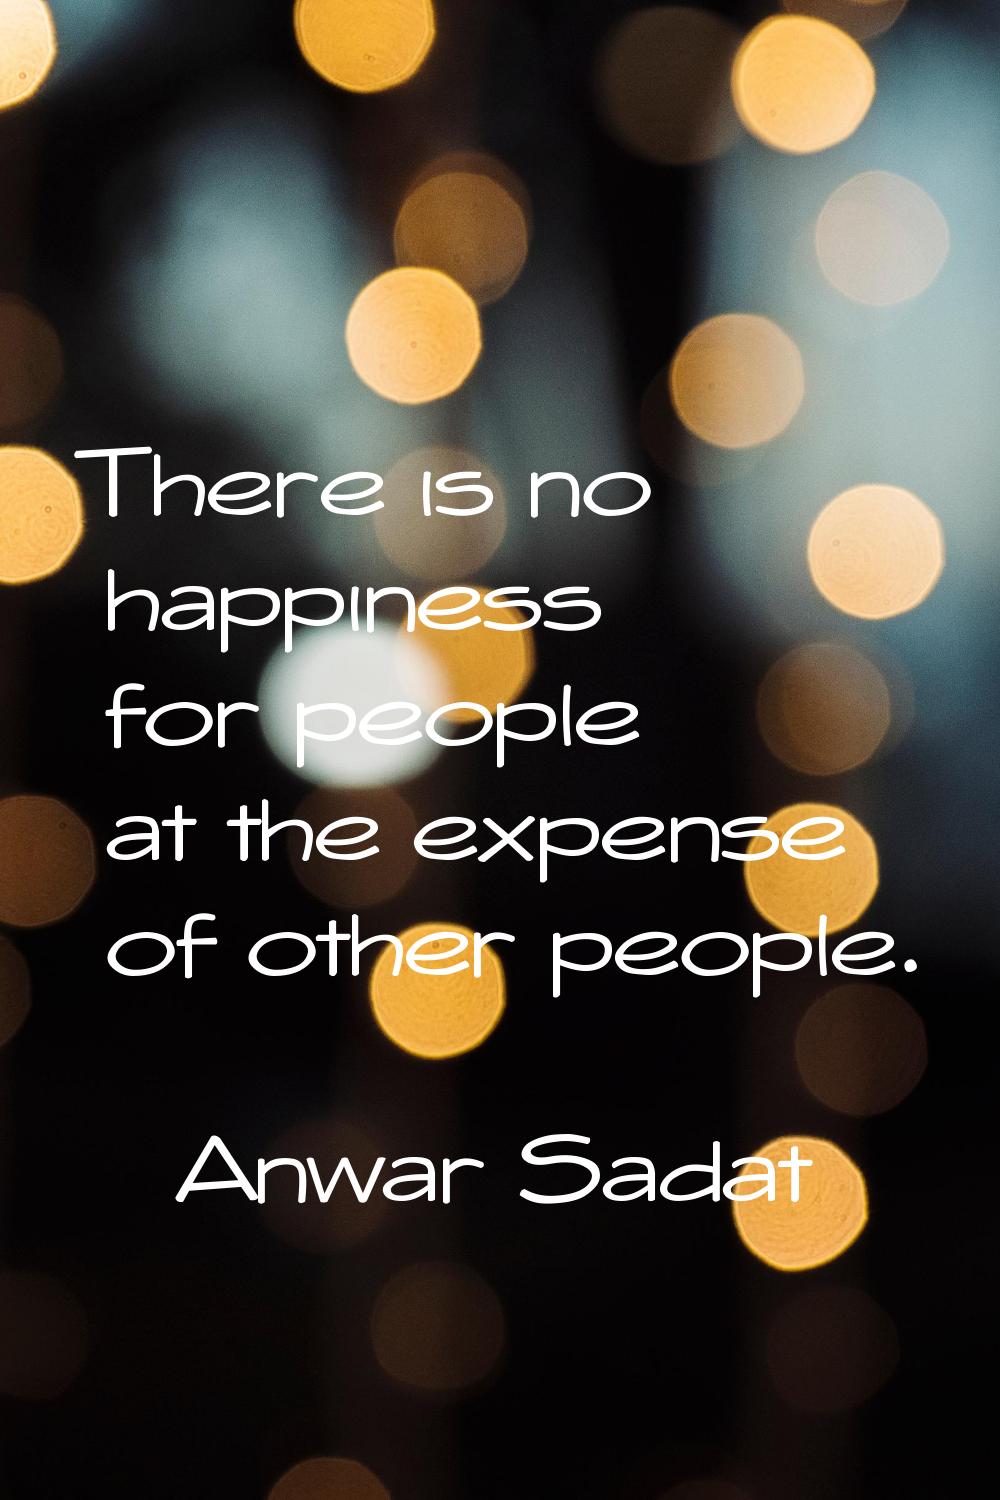 There is no happiness for people at the expense of other people.